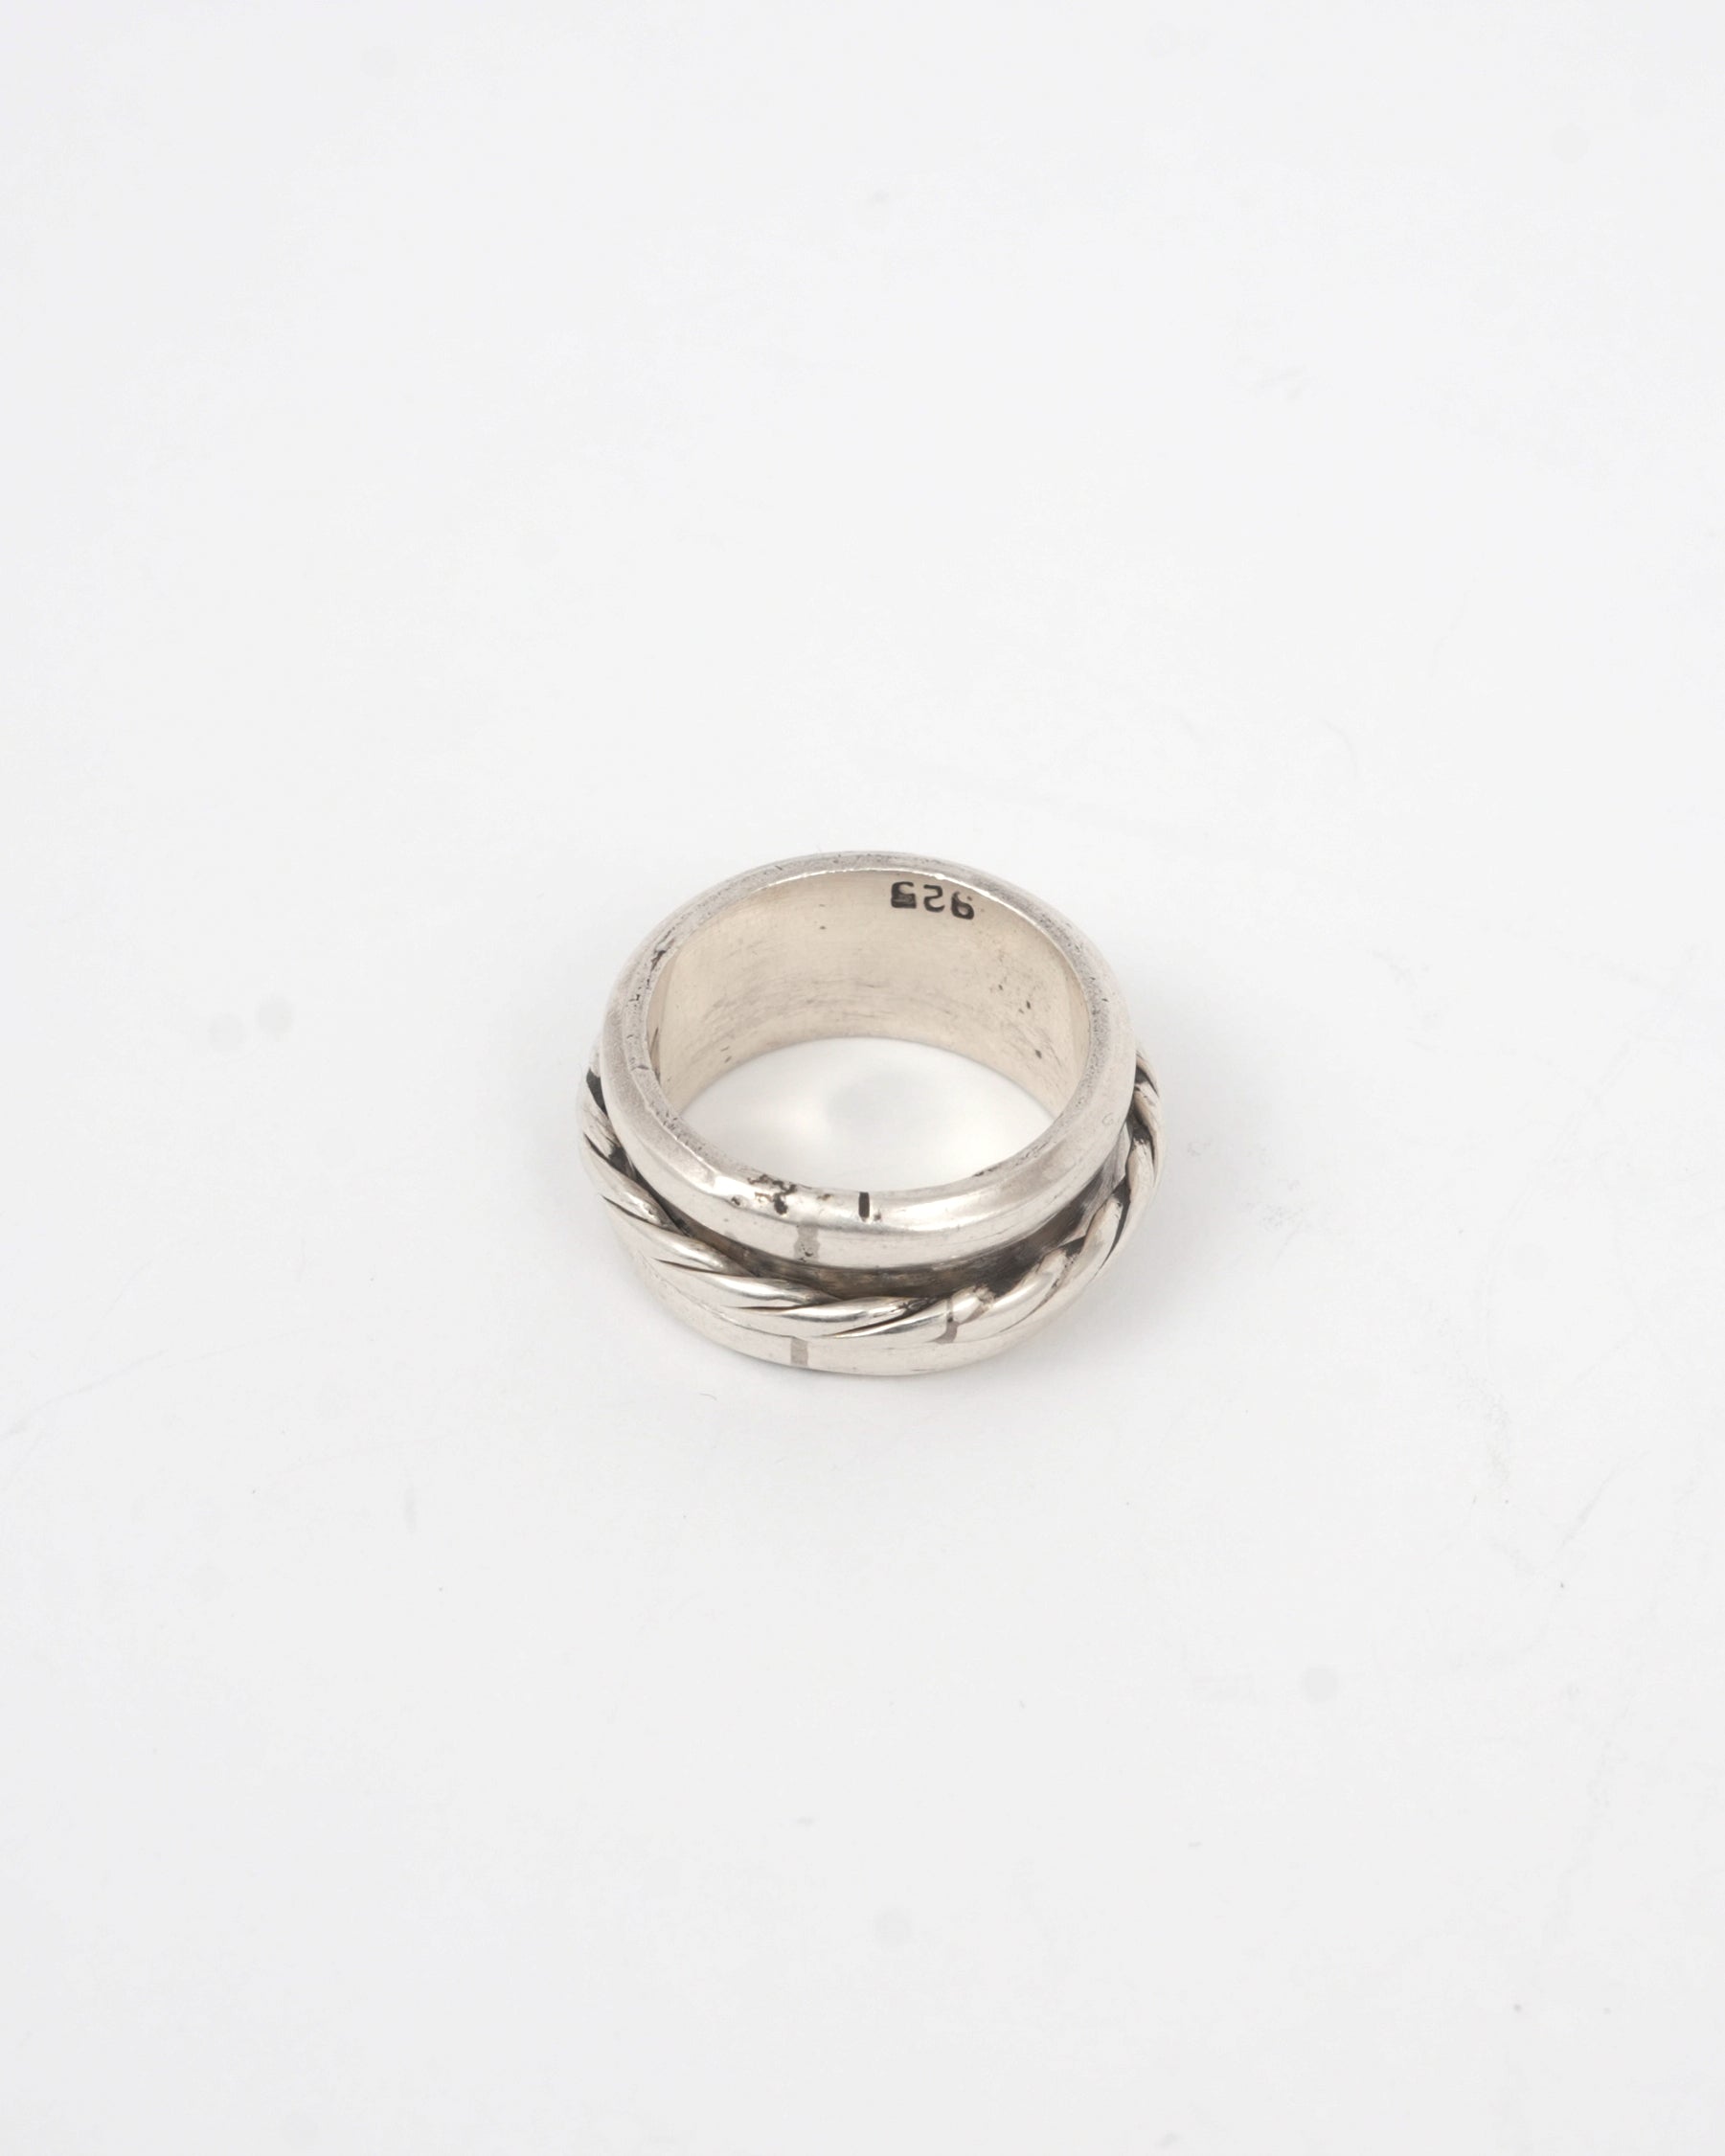 Silver Ring: Size16.5